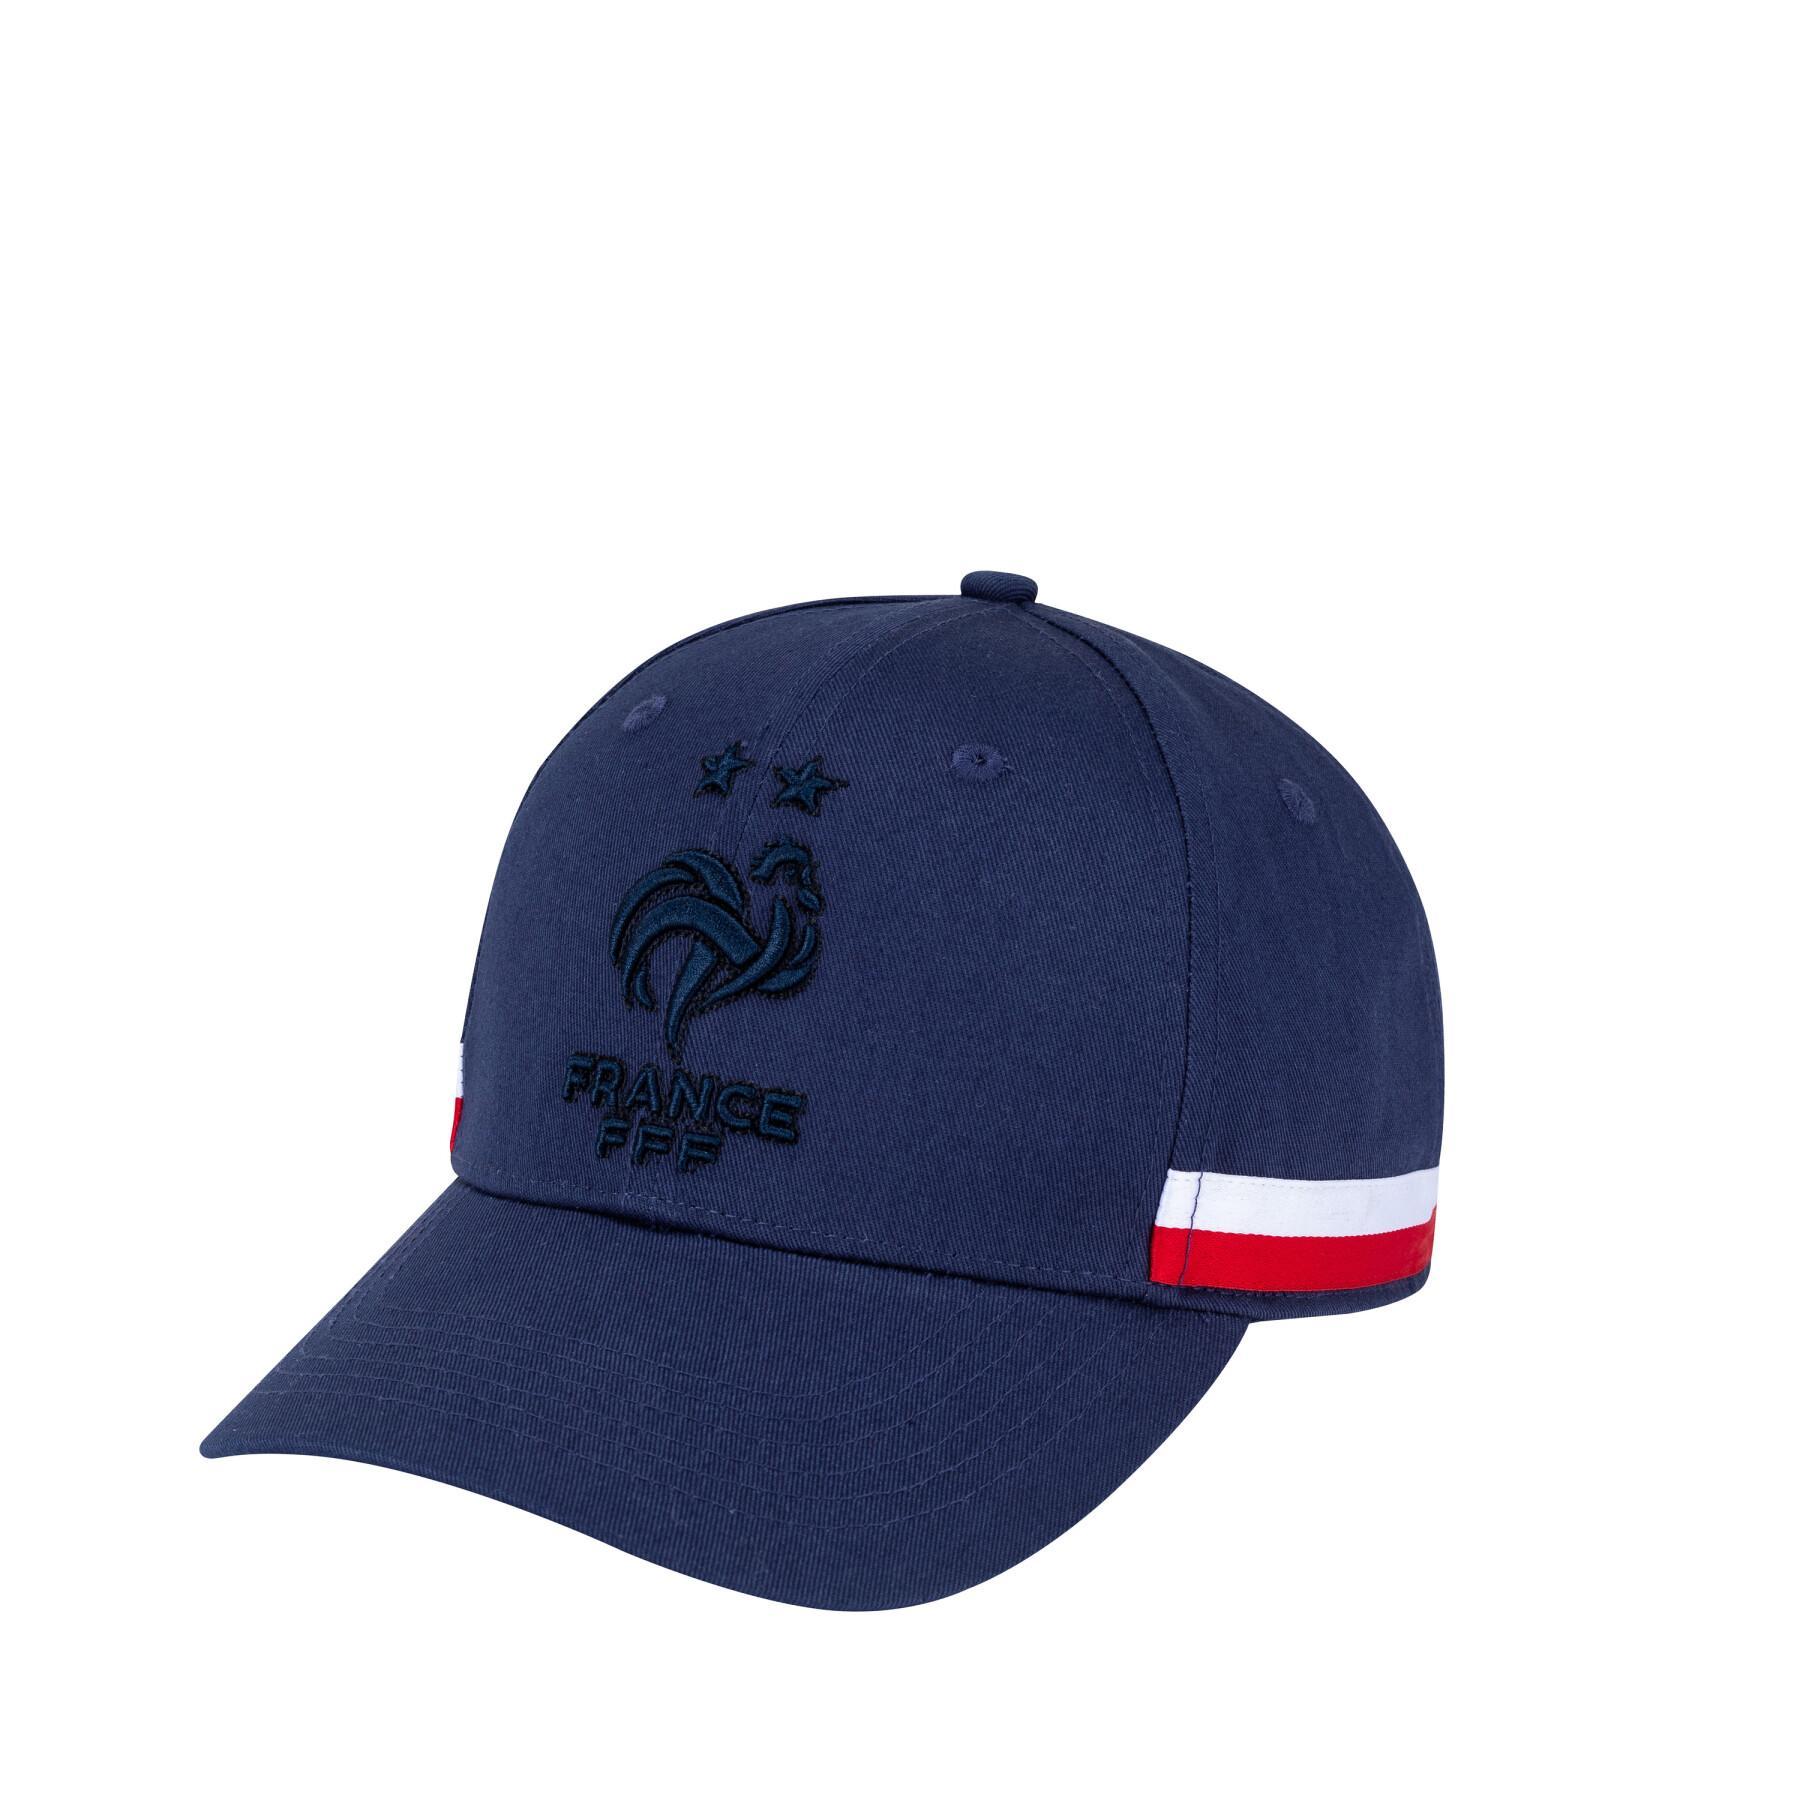 Team cap from France 2022/23 Graphic II